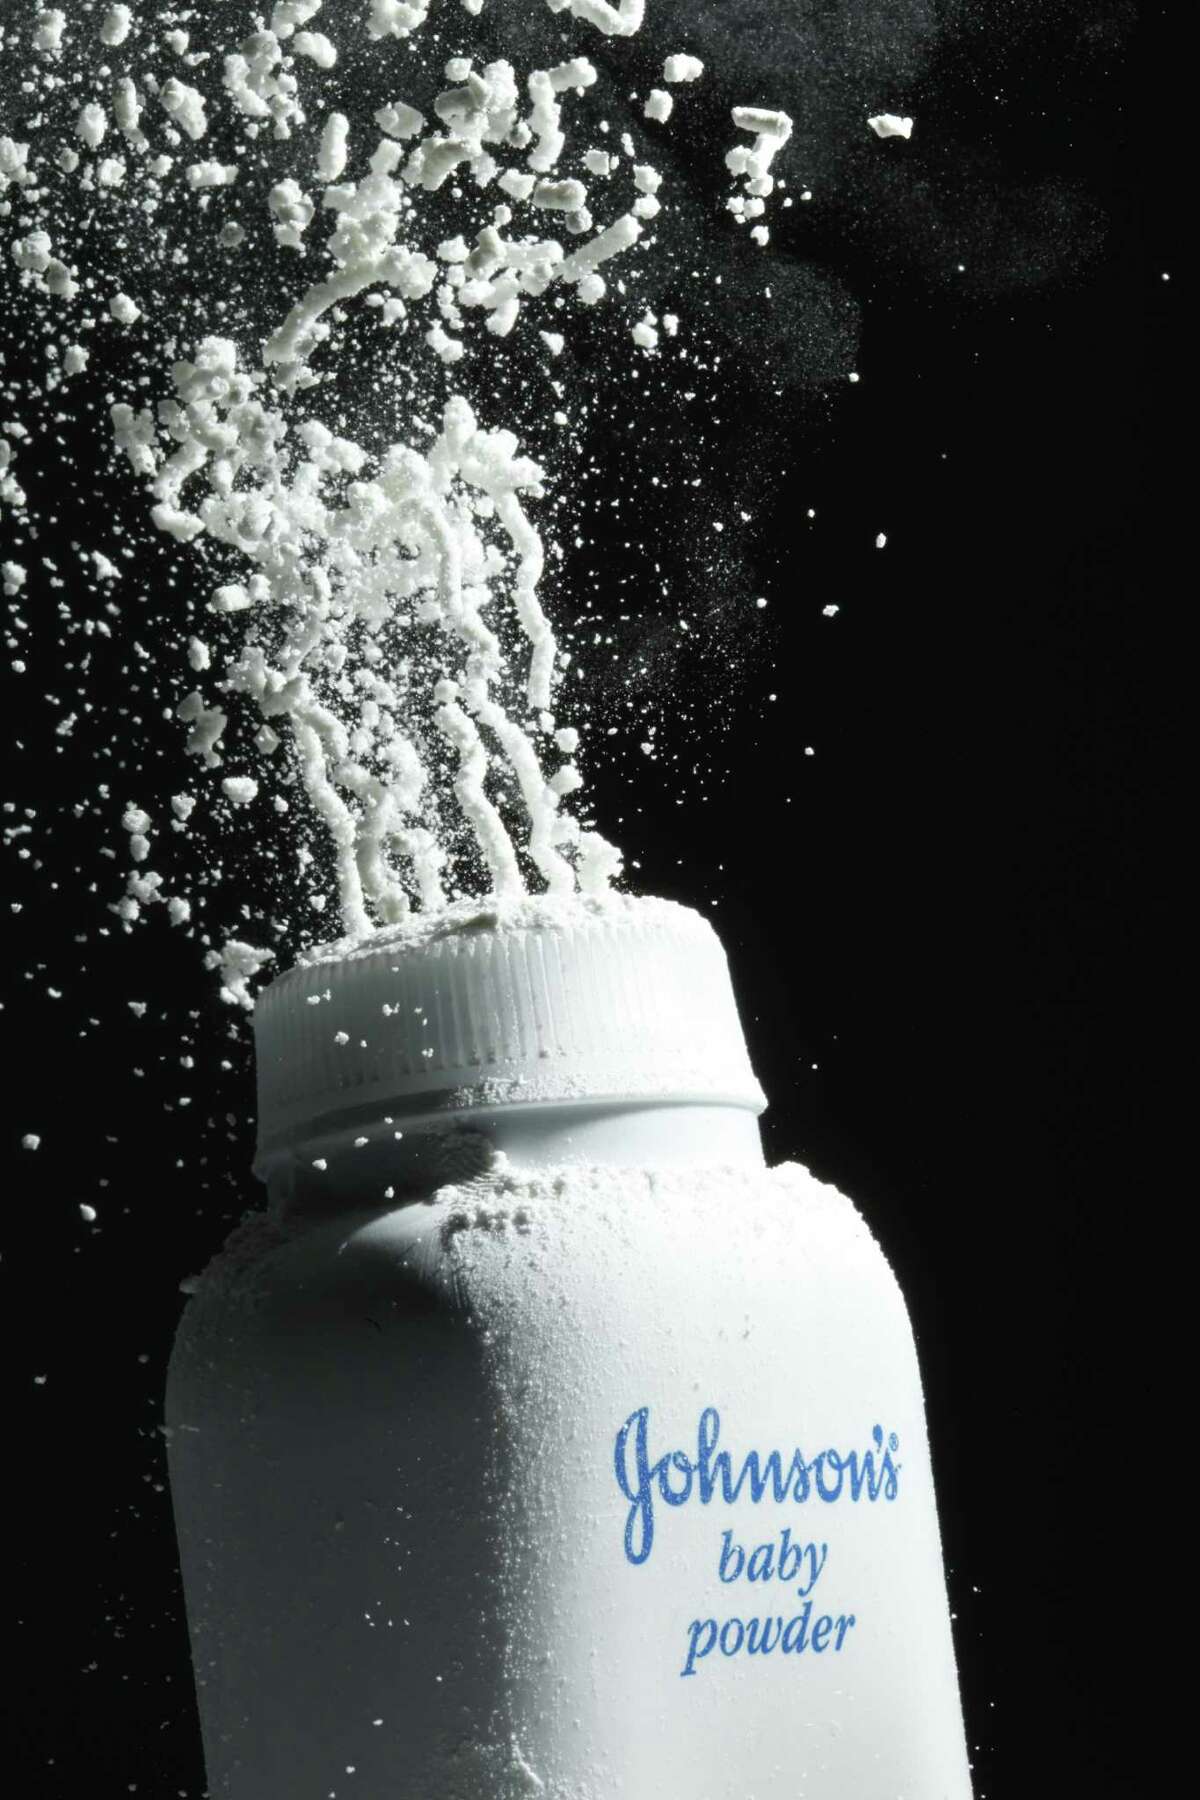 FILE - In this April 19, 2010, file photo, Johnson's baby powder is squeezed from its container in Philadelphia. On Thursday, Oct. 27, 2016, Johnson & Johnson was hit with a multimillion-dollar jury verdict in the massive litigation over whether the talc in its iconic baby powder causes ovarian cancer when applied regularly for feminine hygiene. (AP Photo/Matt Rourke, File)